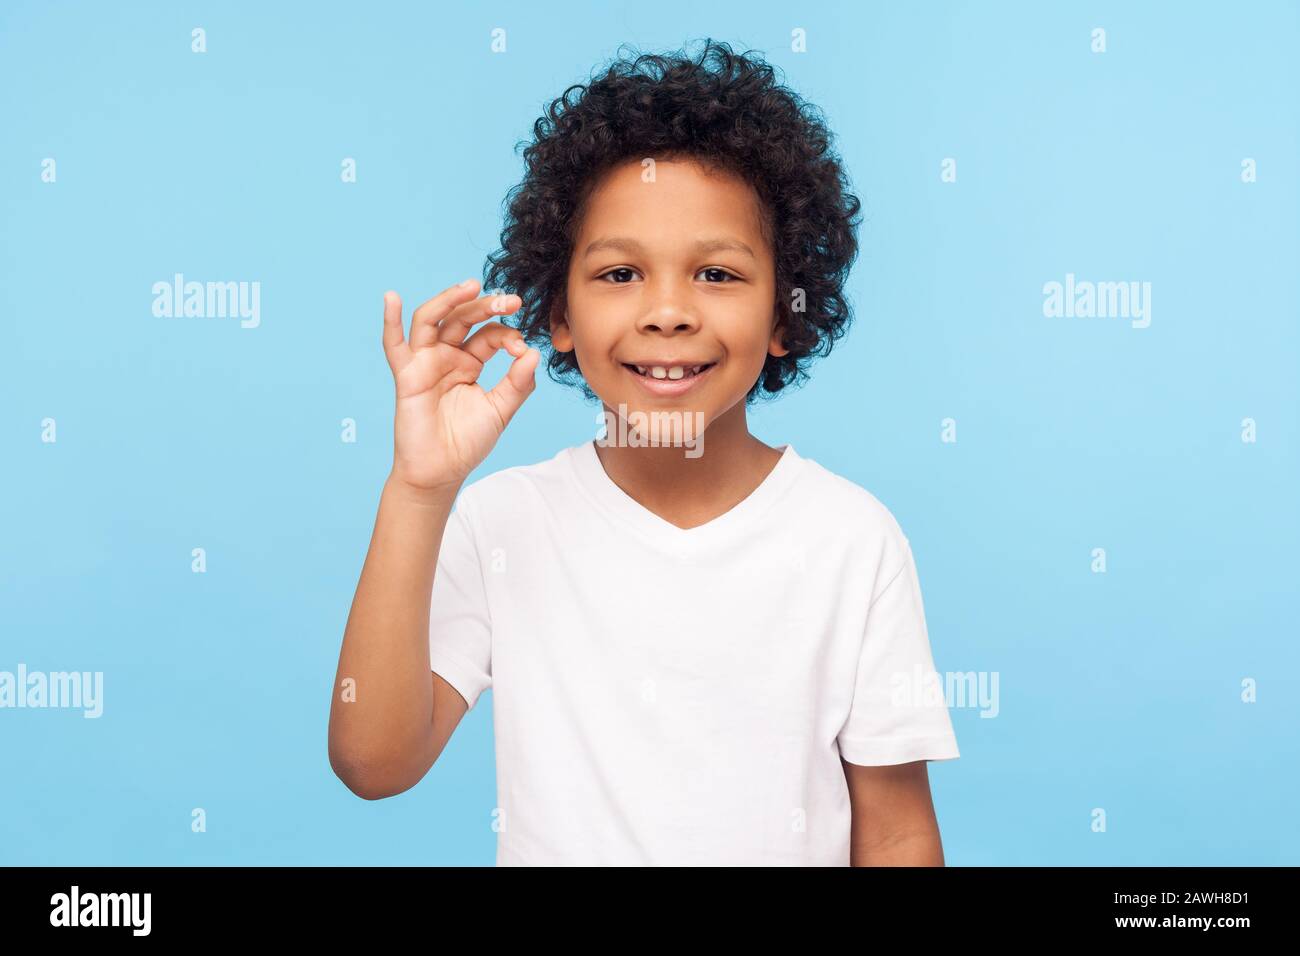 I'm okay! Portrait of adorable joyful little boy with curly hair in white T-shirt showing ok hand gesture and smiling, healthy happy contented with li Stock Photo